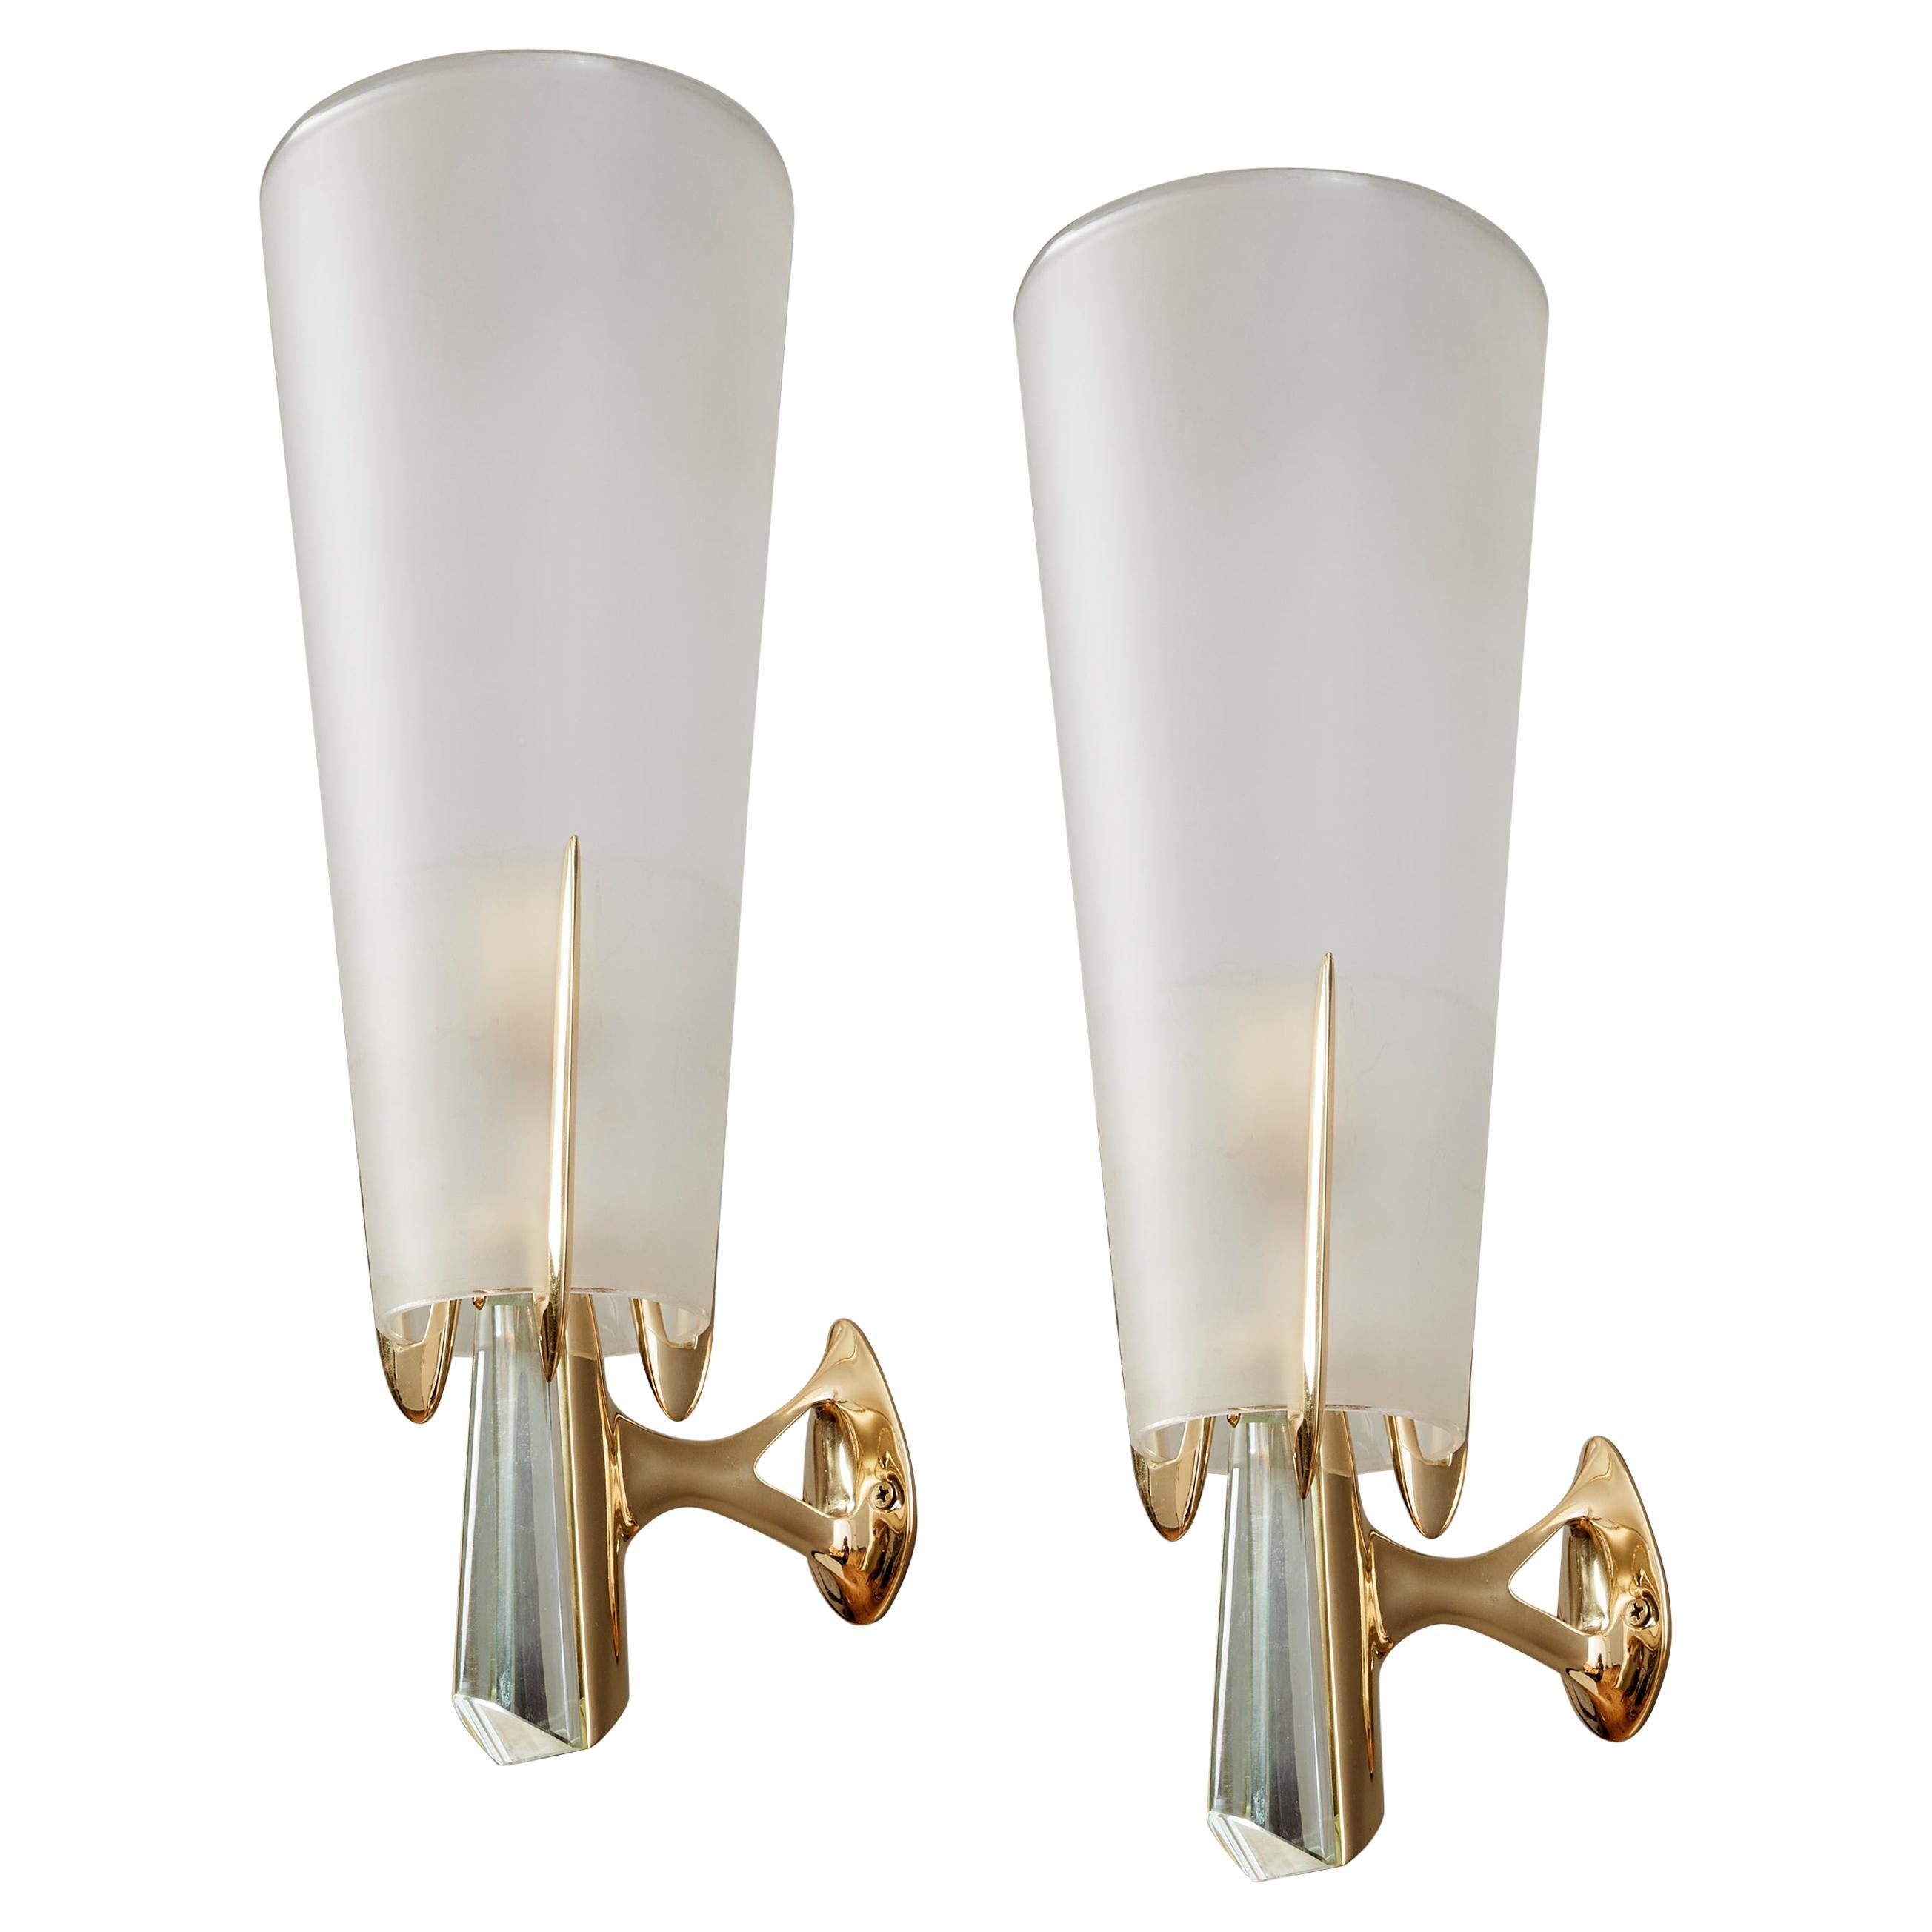 Max Ingrand for Fontana Arte: Rare Sconces in Brass and Crystal, Italy 1955 For Sale